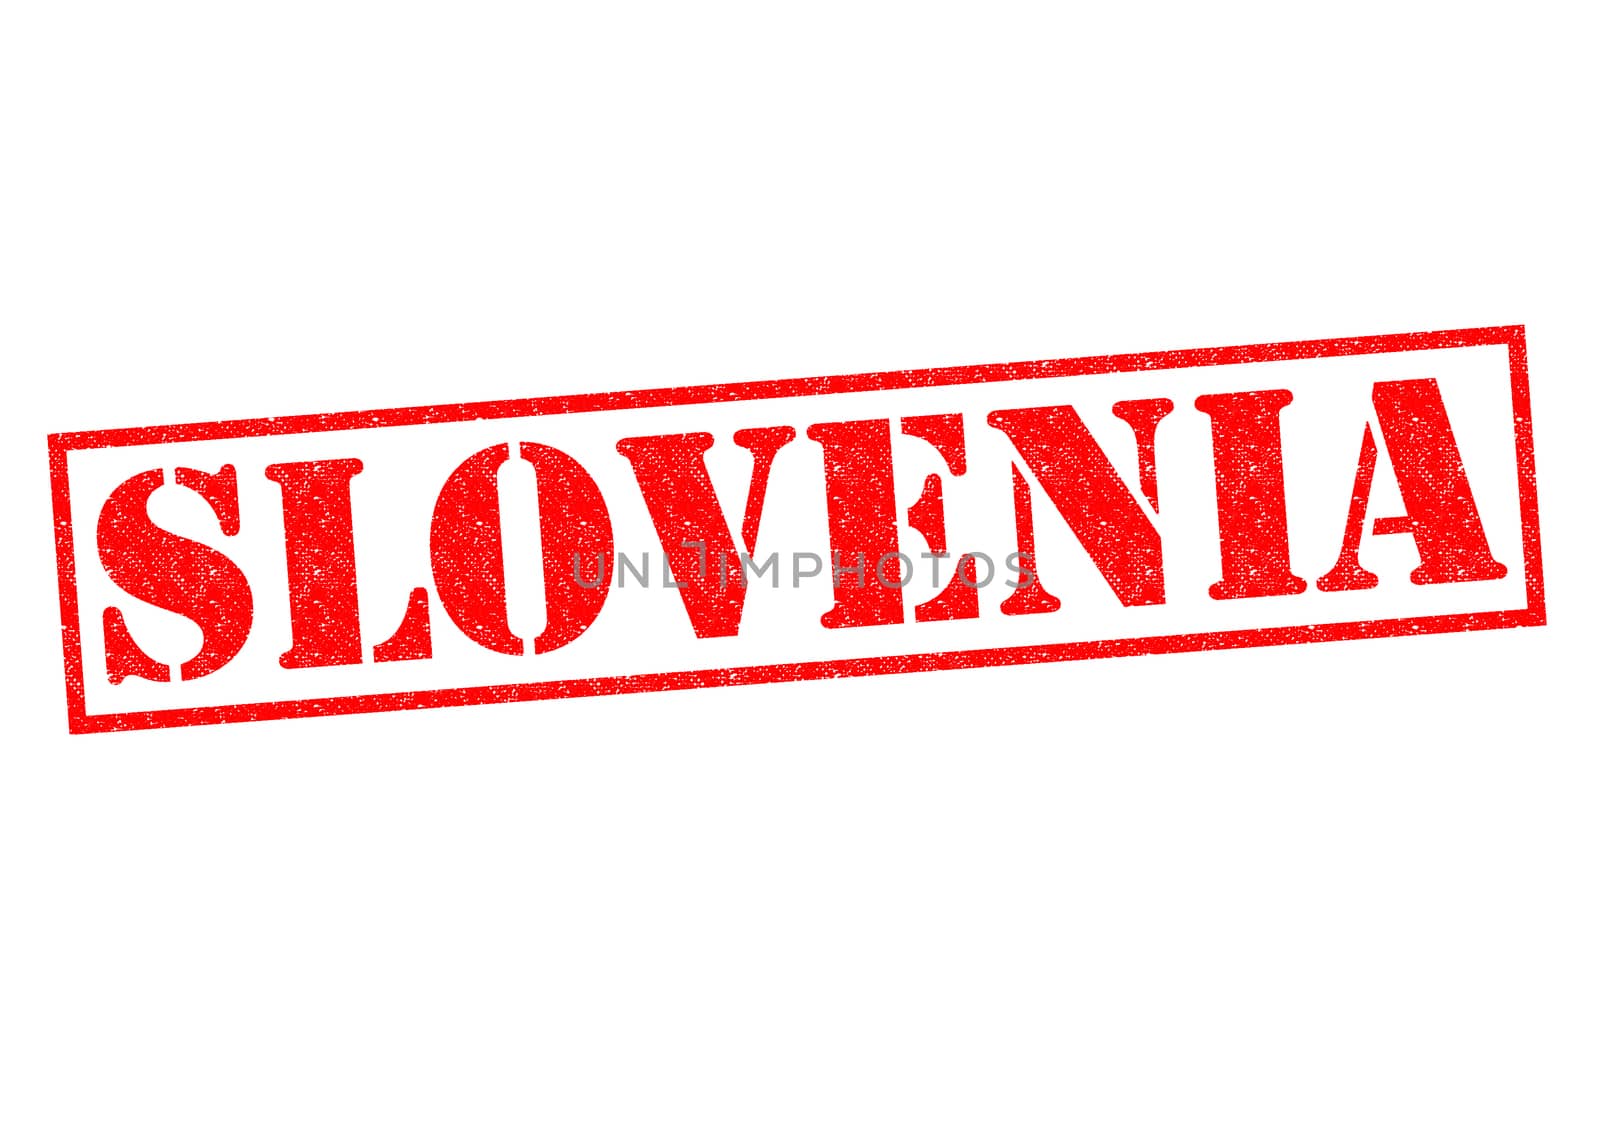 SLOVENIA Rubber Stamp over a white background.